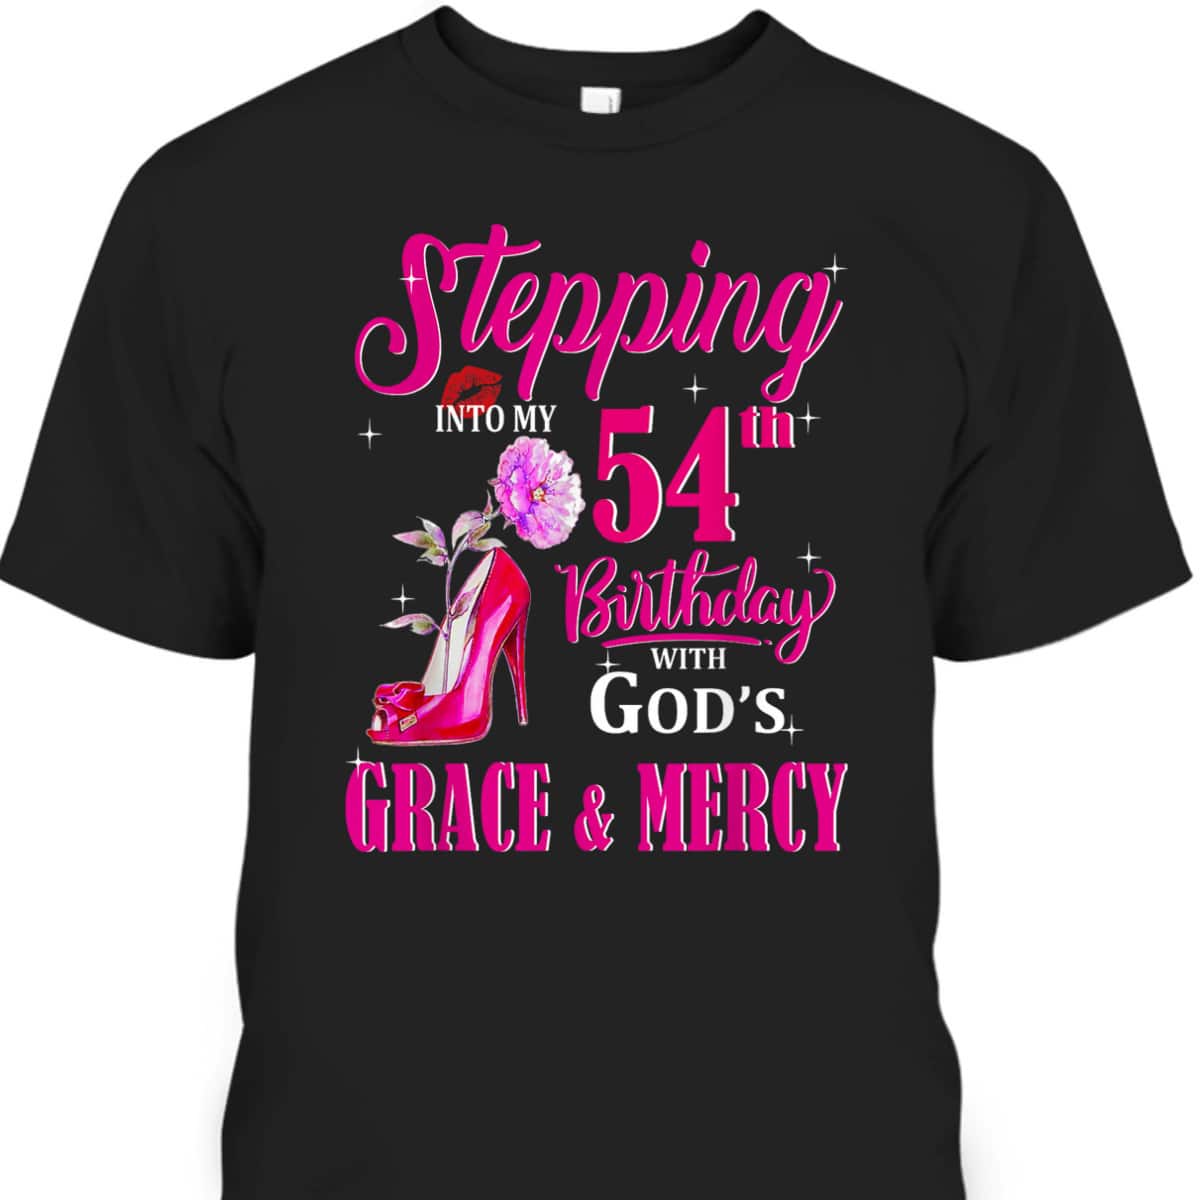 Stepping Into My 54th Birthday With God's Grace And Mercy T-Shirt